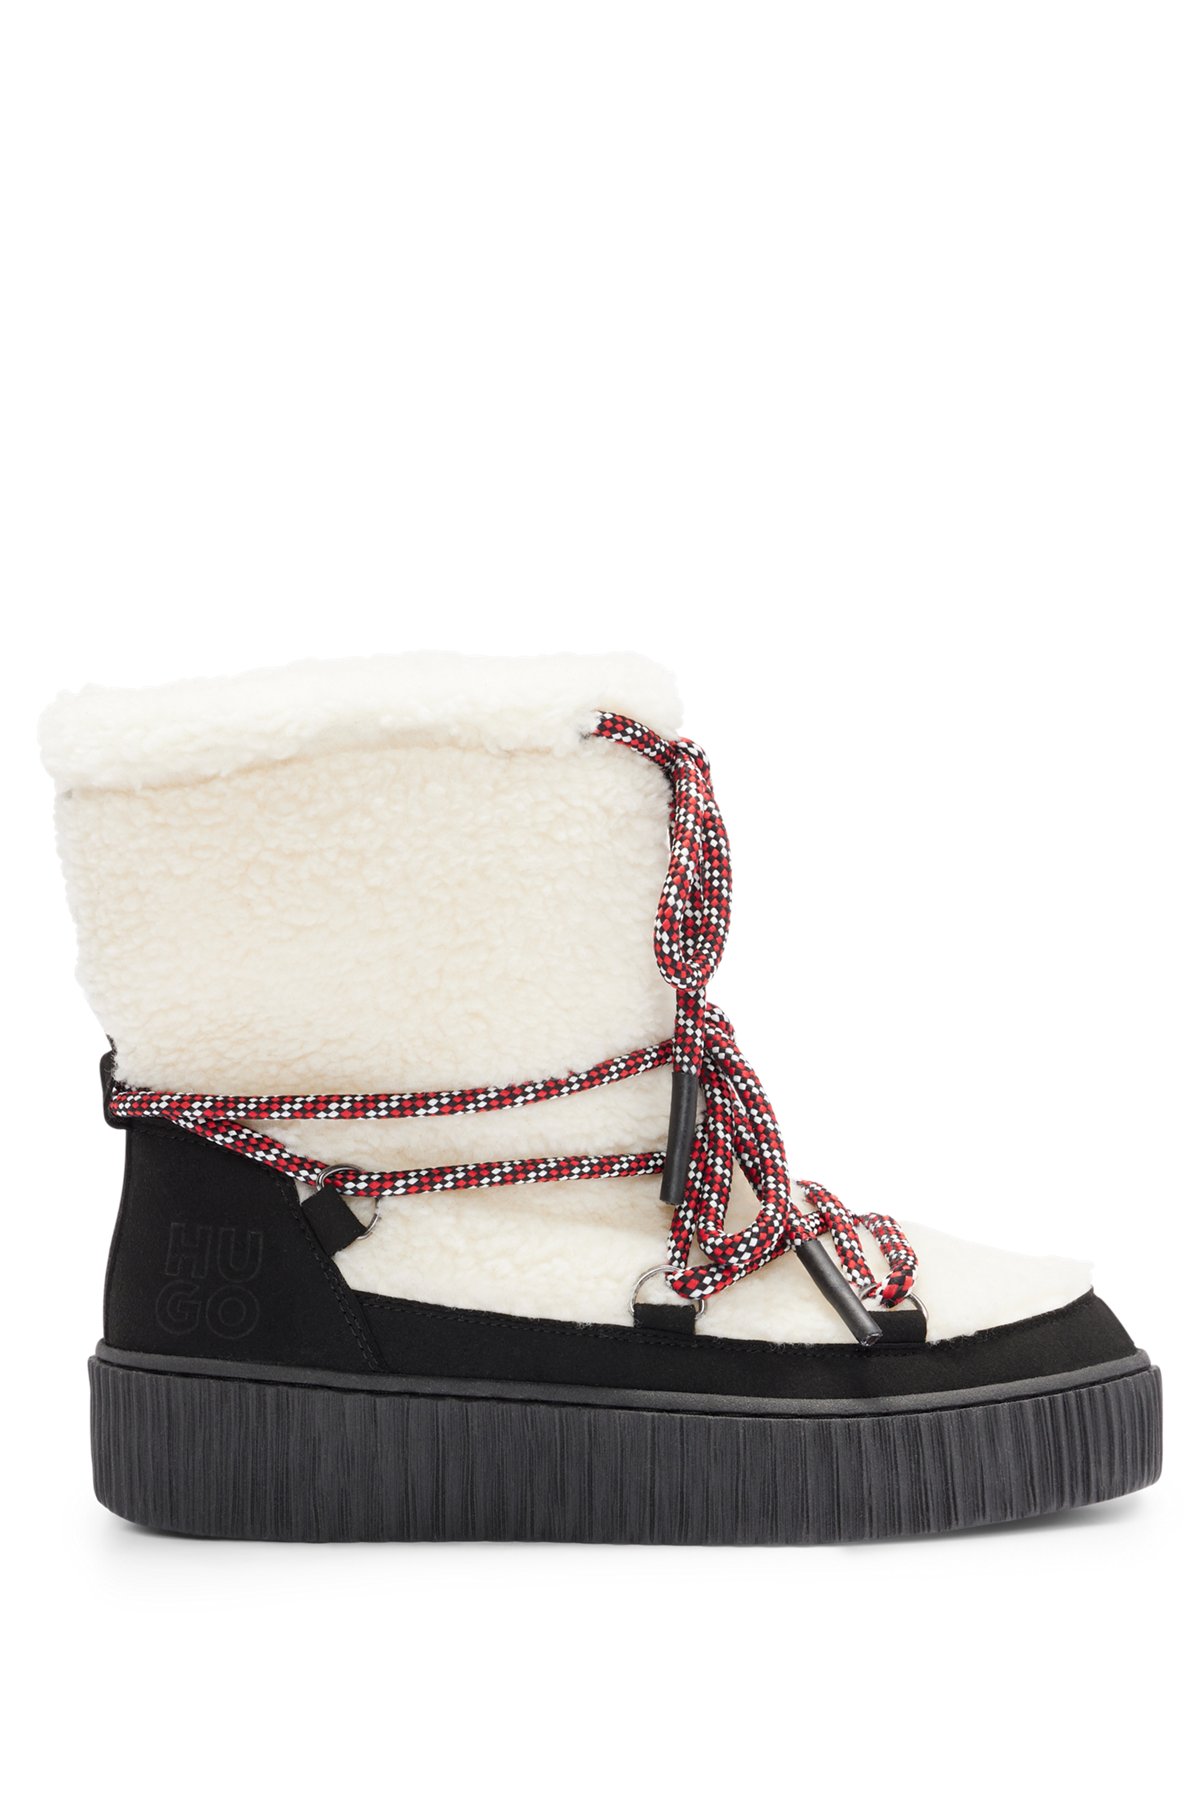 Teddy winter boots with lace-up details, White